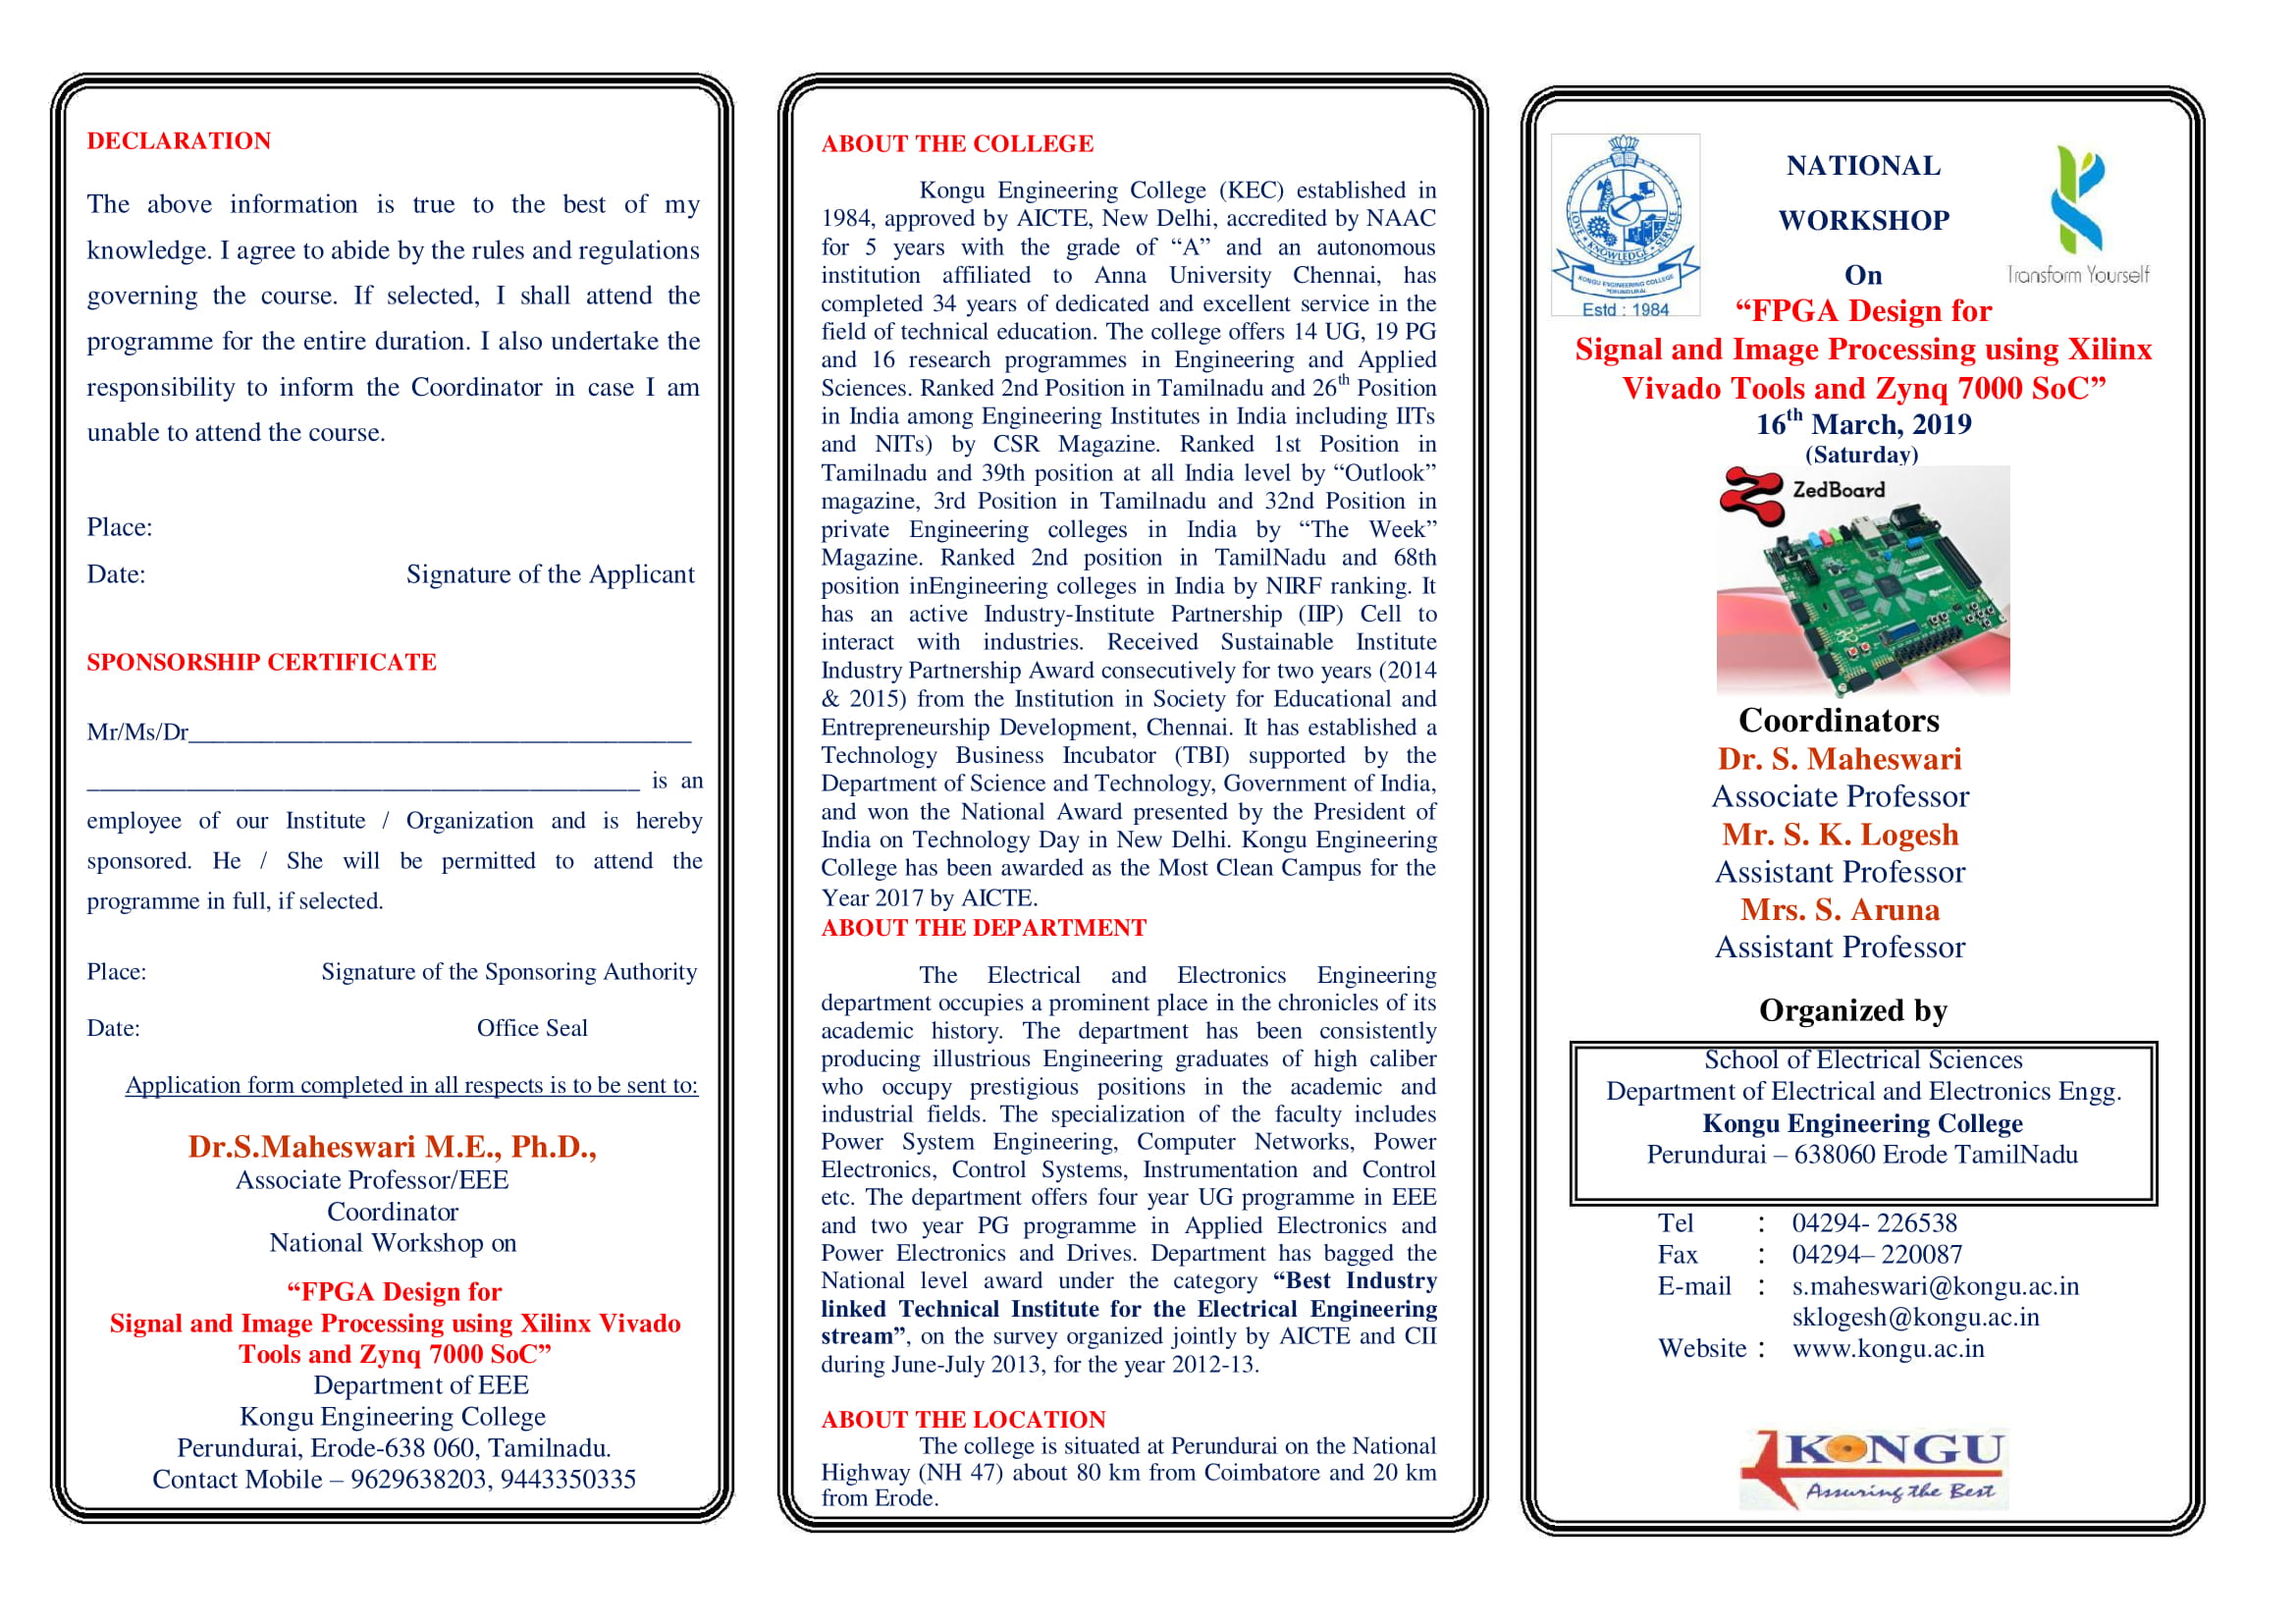 NATIONAL WORKSHOP On “FPGA Design for Signal and Image Processing using Xilinx Vivado Tools and Zynq 7000 SoC”, Erode, Tamil Nadu, India